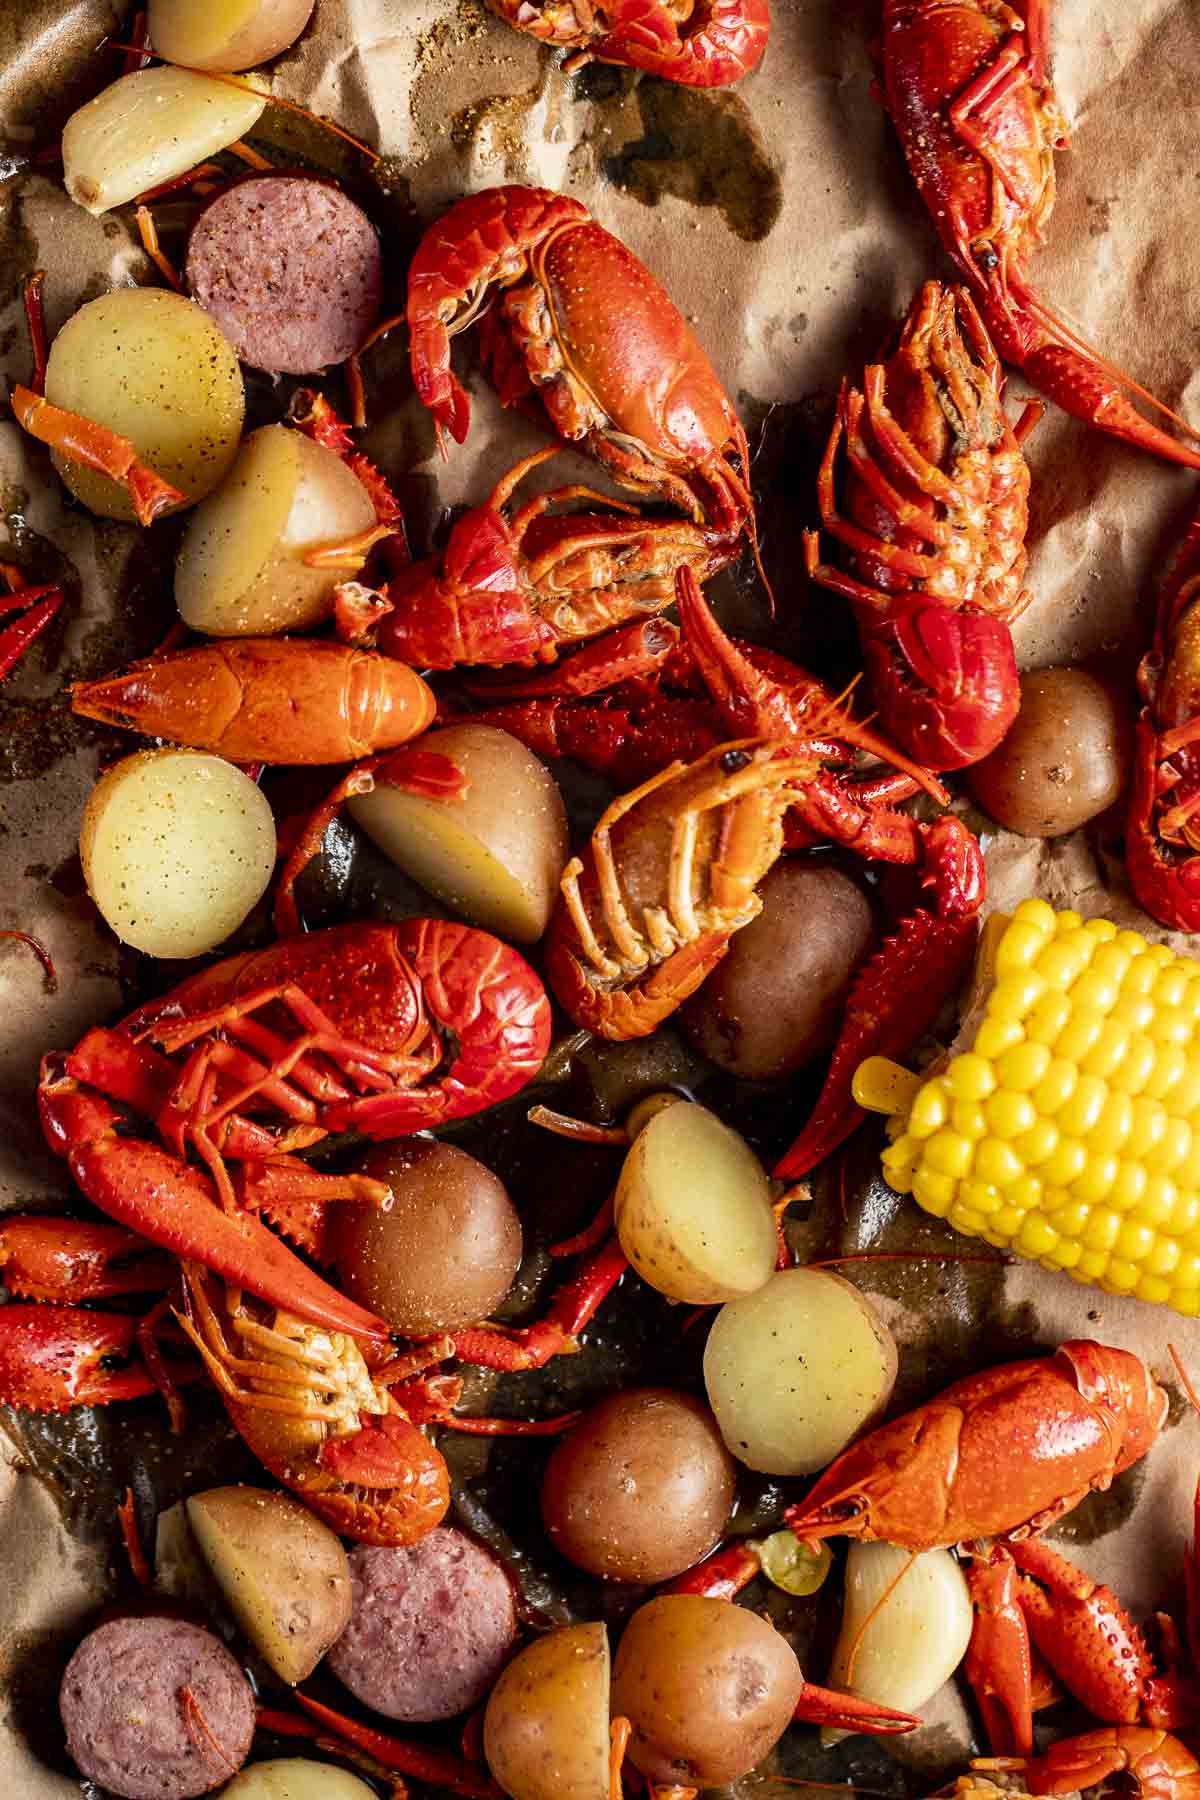 Overhead view of crawfish boil on brown paper.